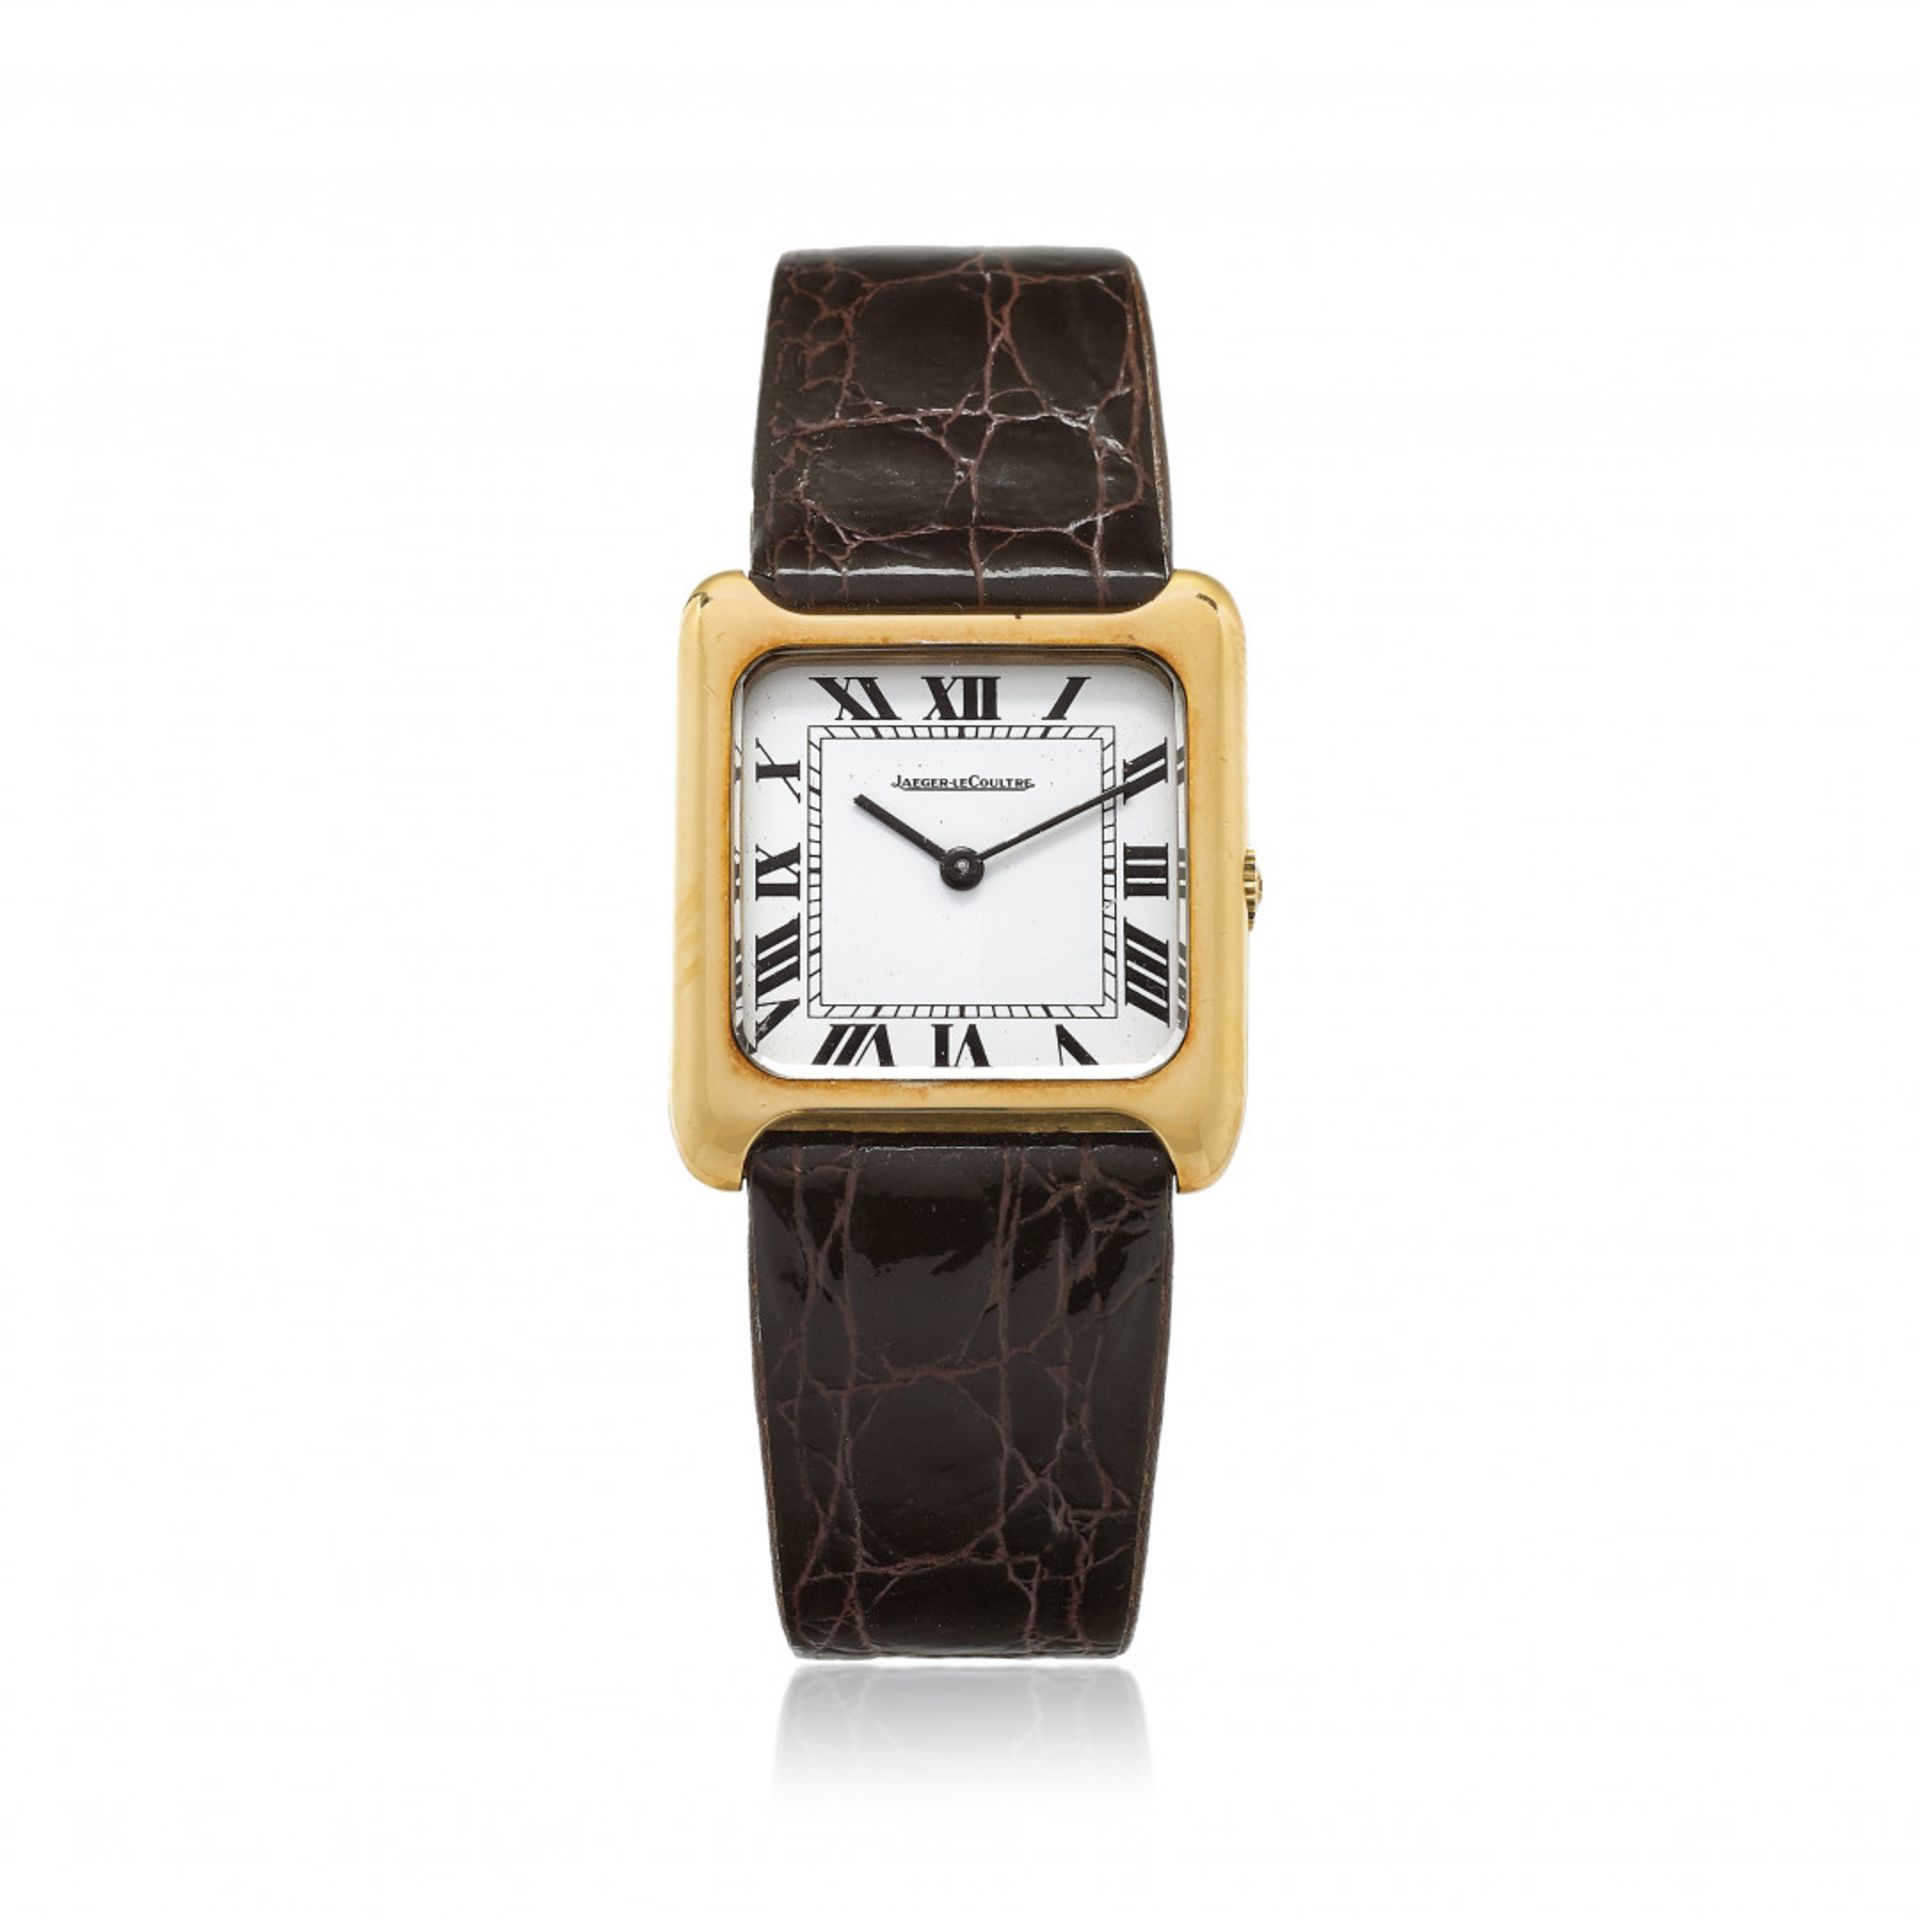 JAEGER-LECOULTRE REF. 9127.21 IN GOLD, 70s